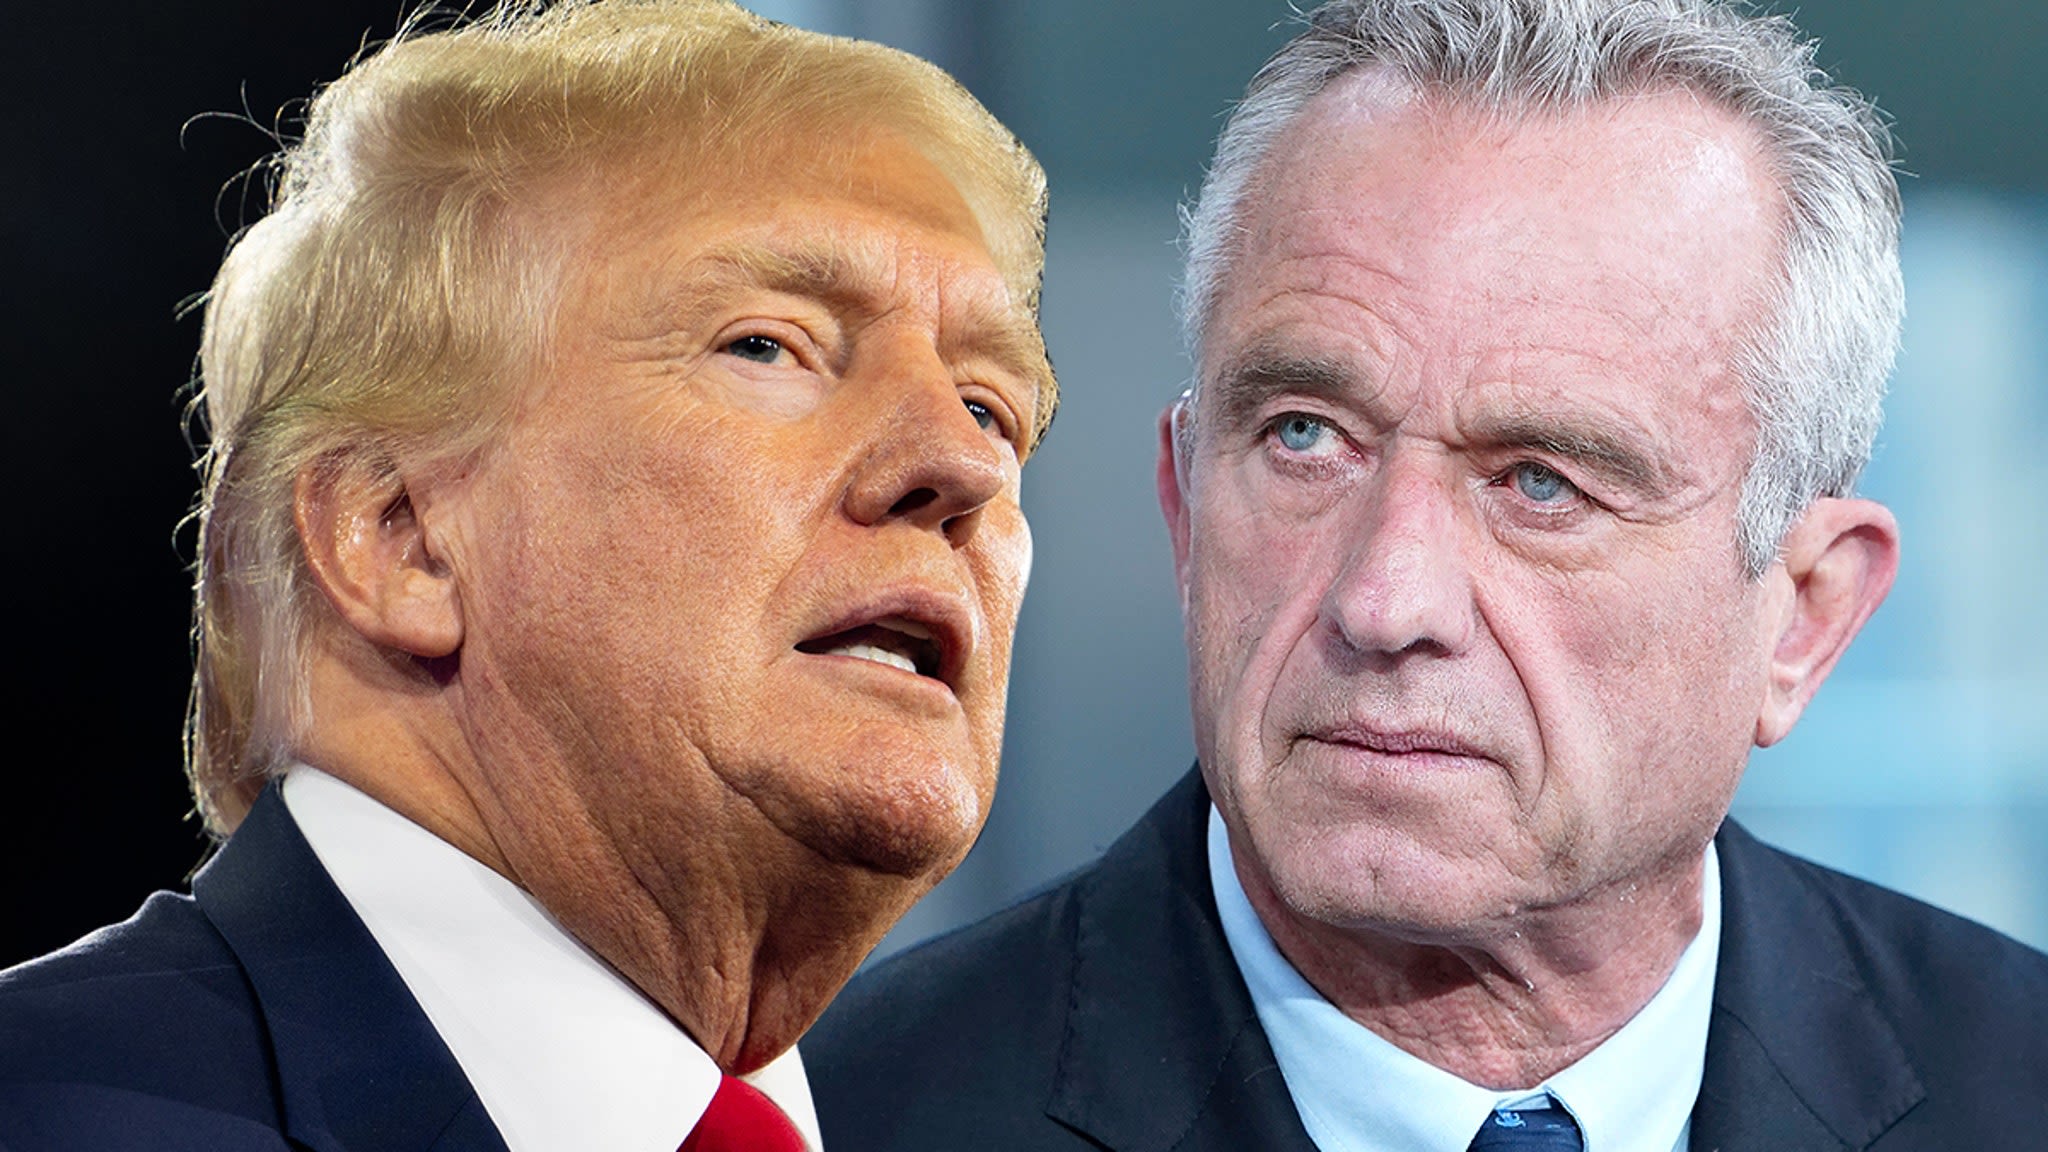 RFK Jr. Now Being Afforded Secret Service Protection After Trump's Plea